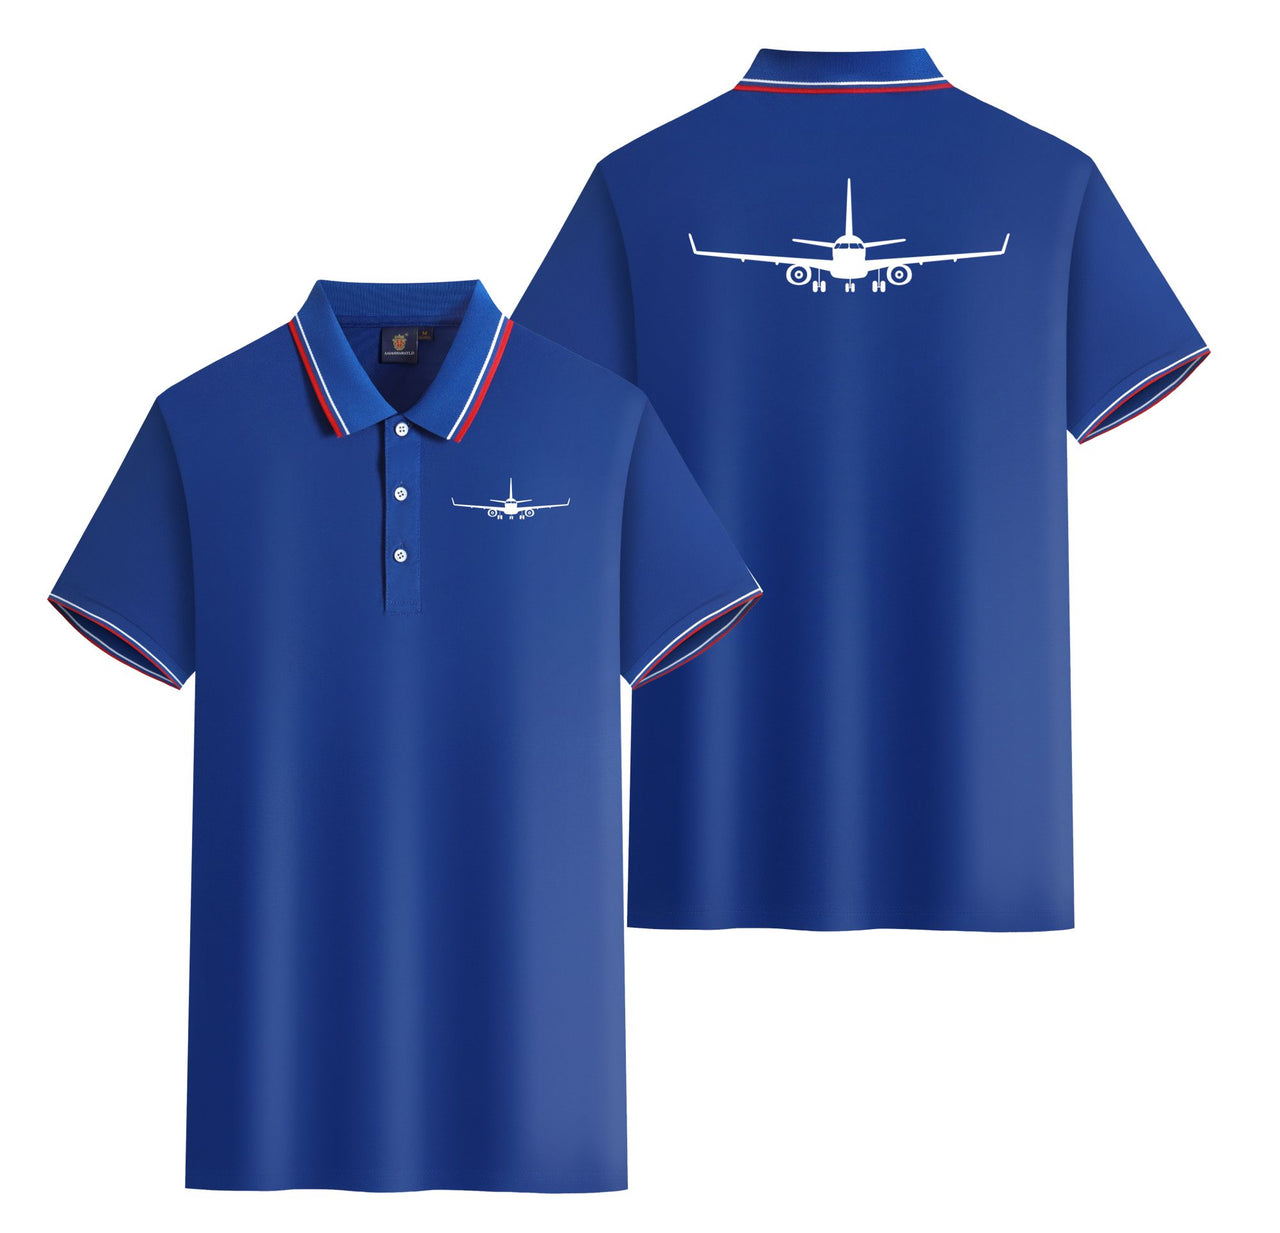 Embraer E-190 Silhouette Plane Designed Stylish Polo T-Shirts (Double-Side)